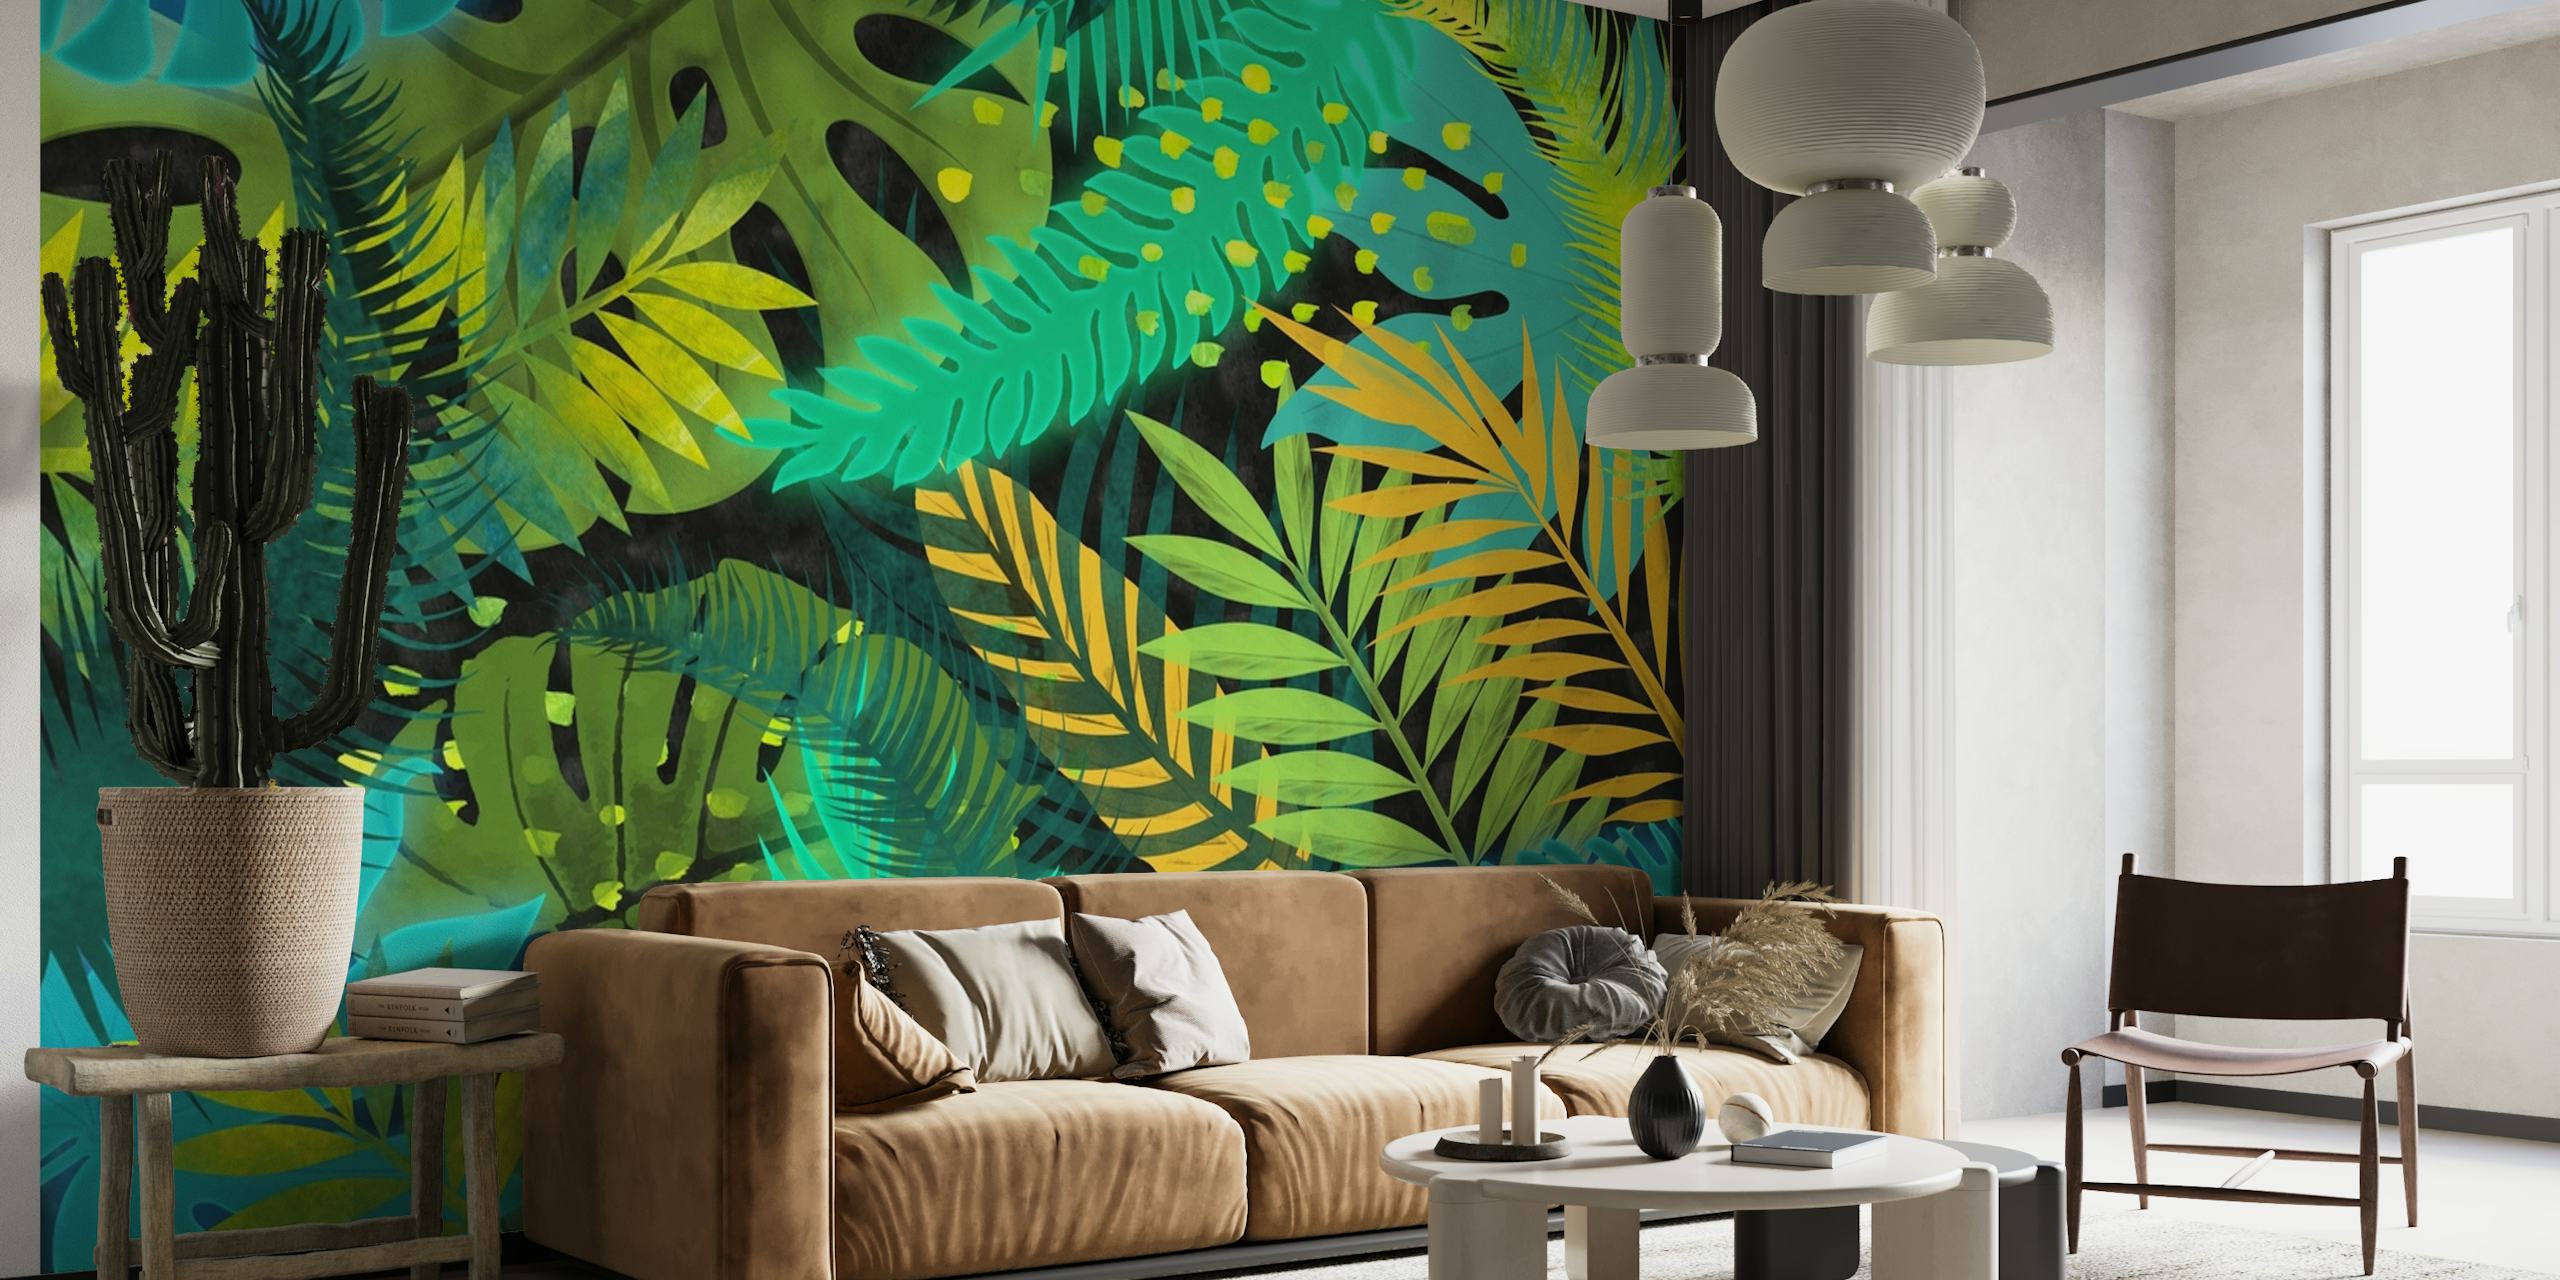 Tropical foliage wall mural with blue, green, and yellow leaves for interior decoration